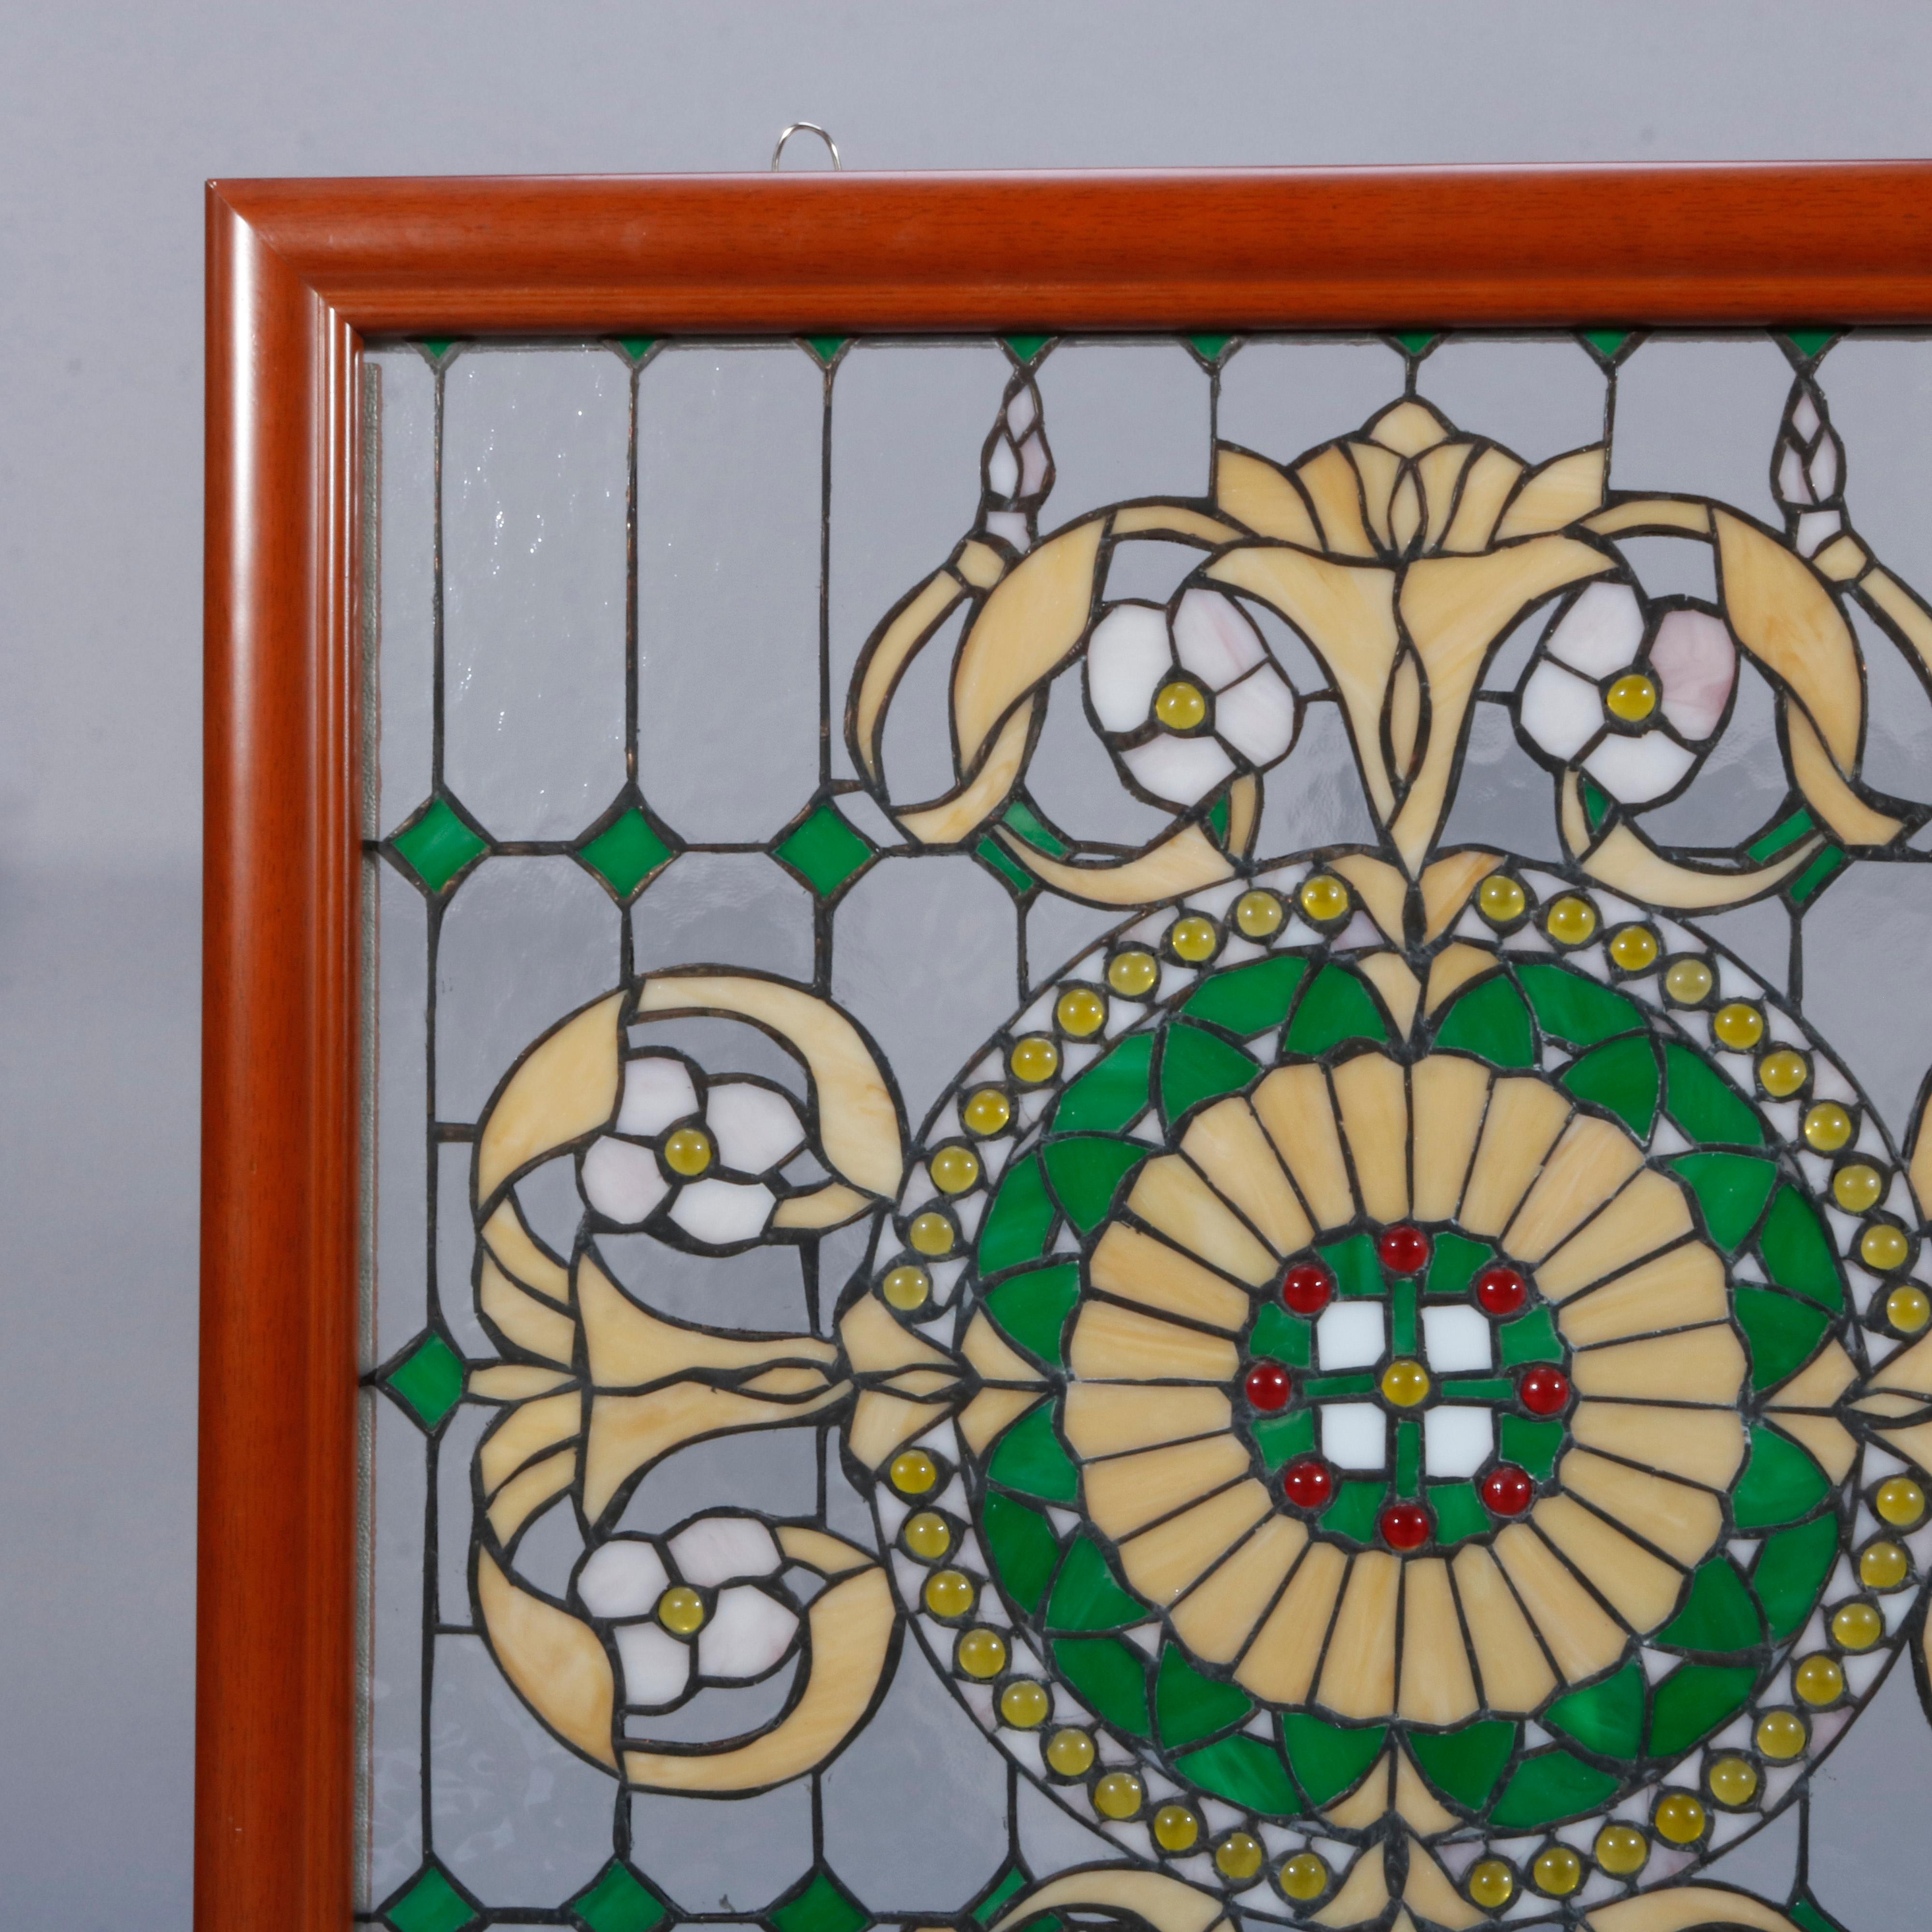 American Vintage Arts & Crafts Style Jeweled Leaded Glass Window, 20th Century